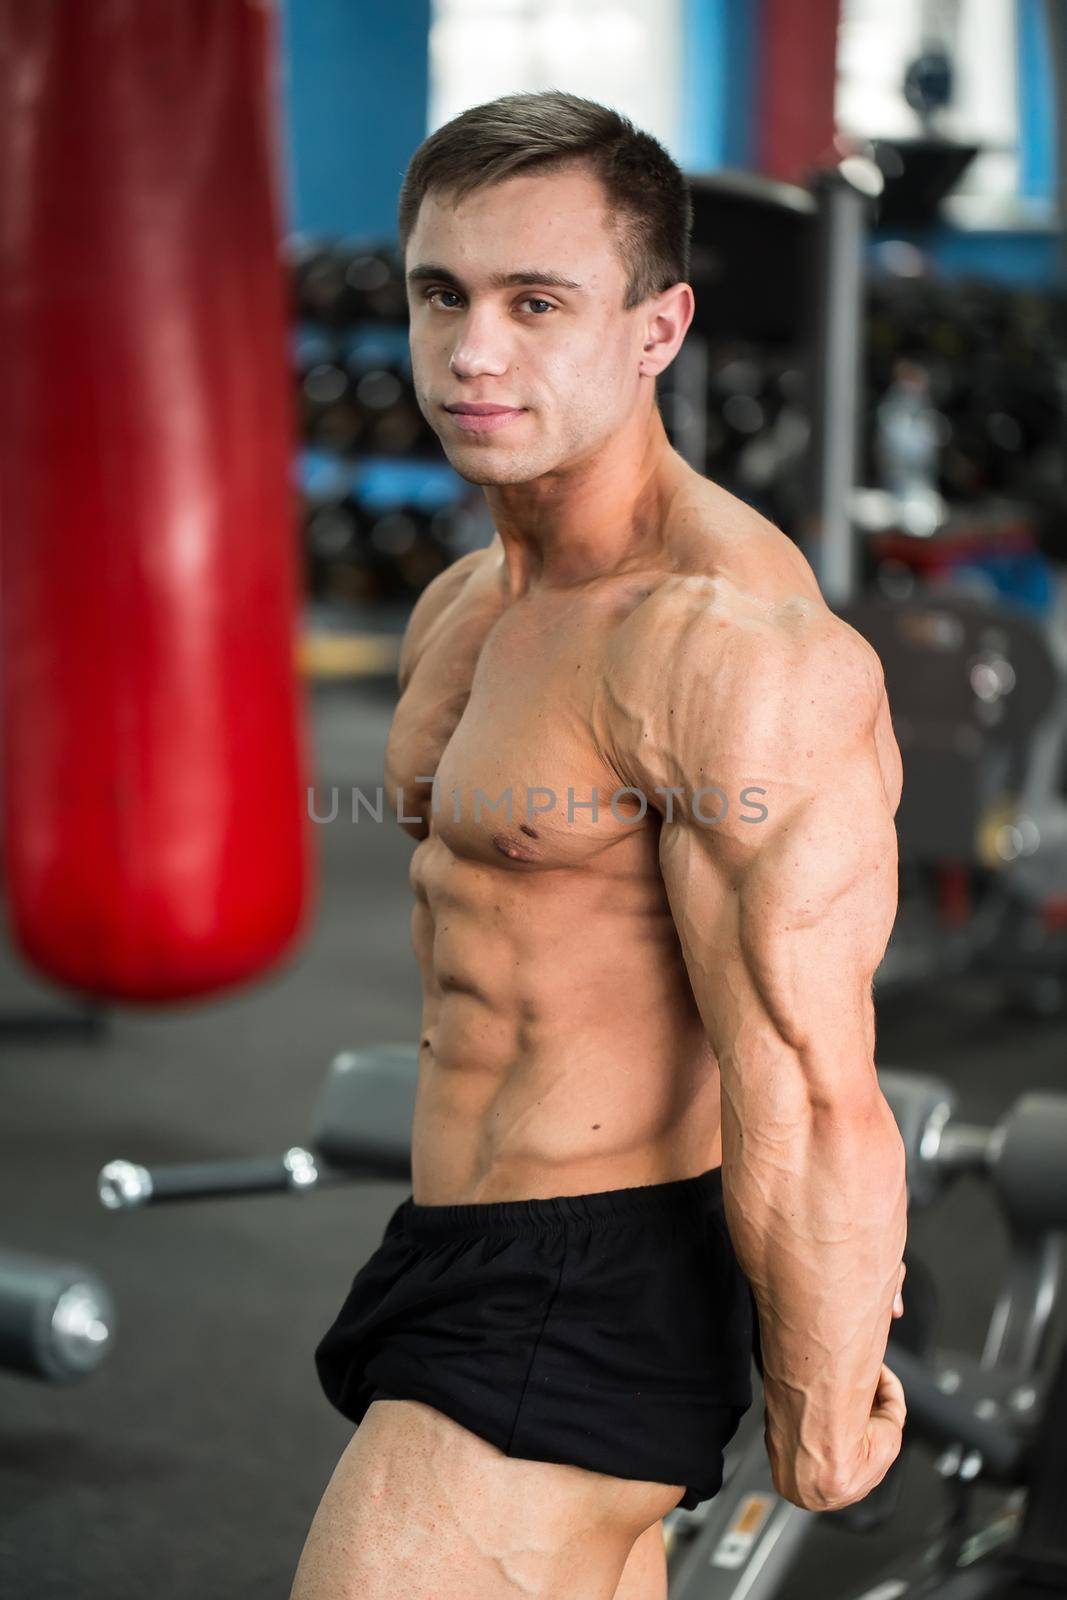 detail of a bodybuilder posing in the gym: side chest